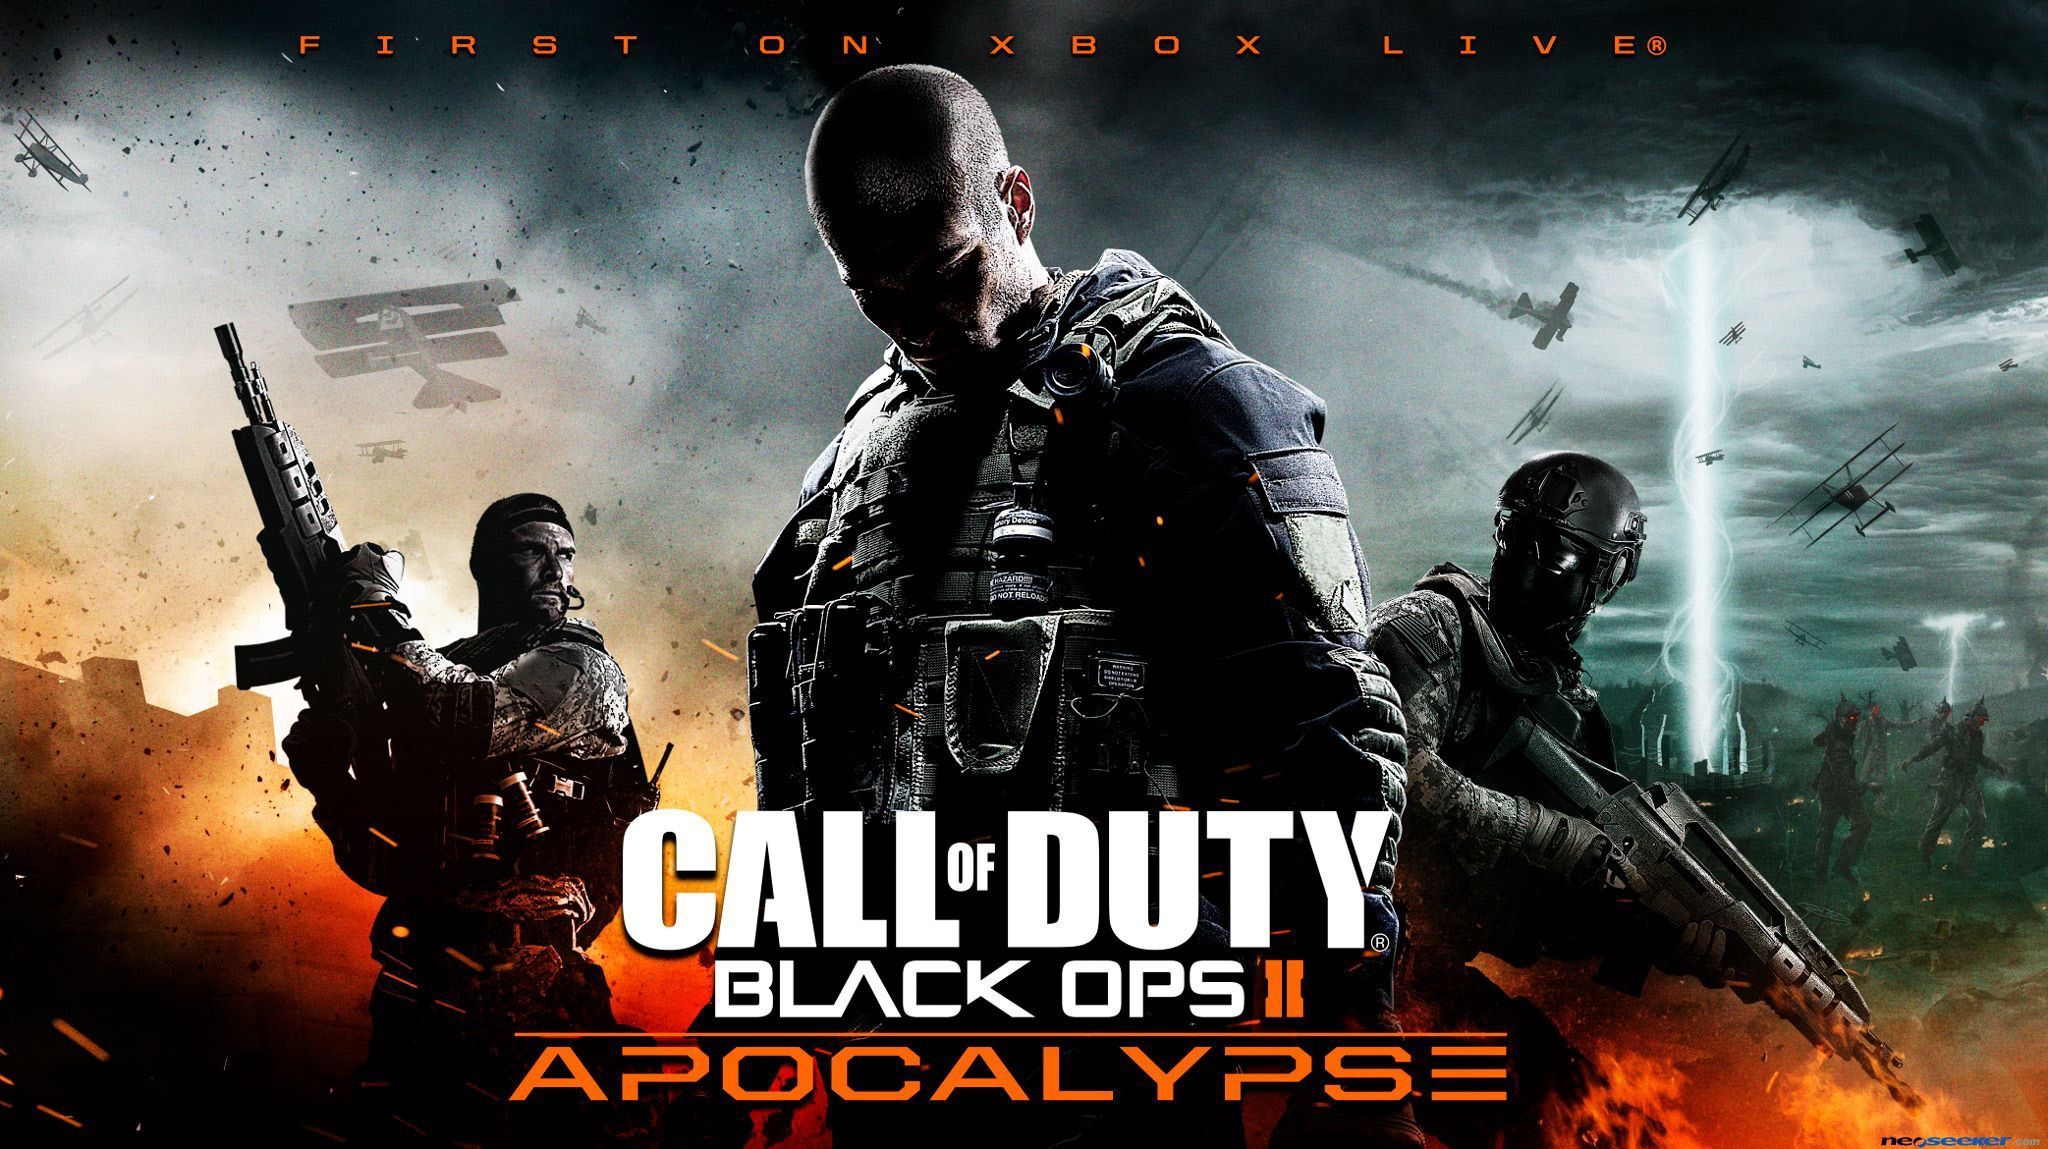 call of duty black ops 2 wallpaper HD. Call of duty, Call of duty black, Call duty black ops